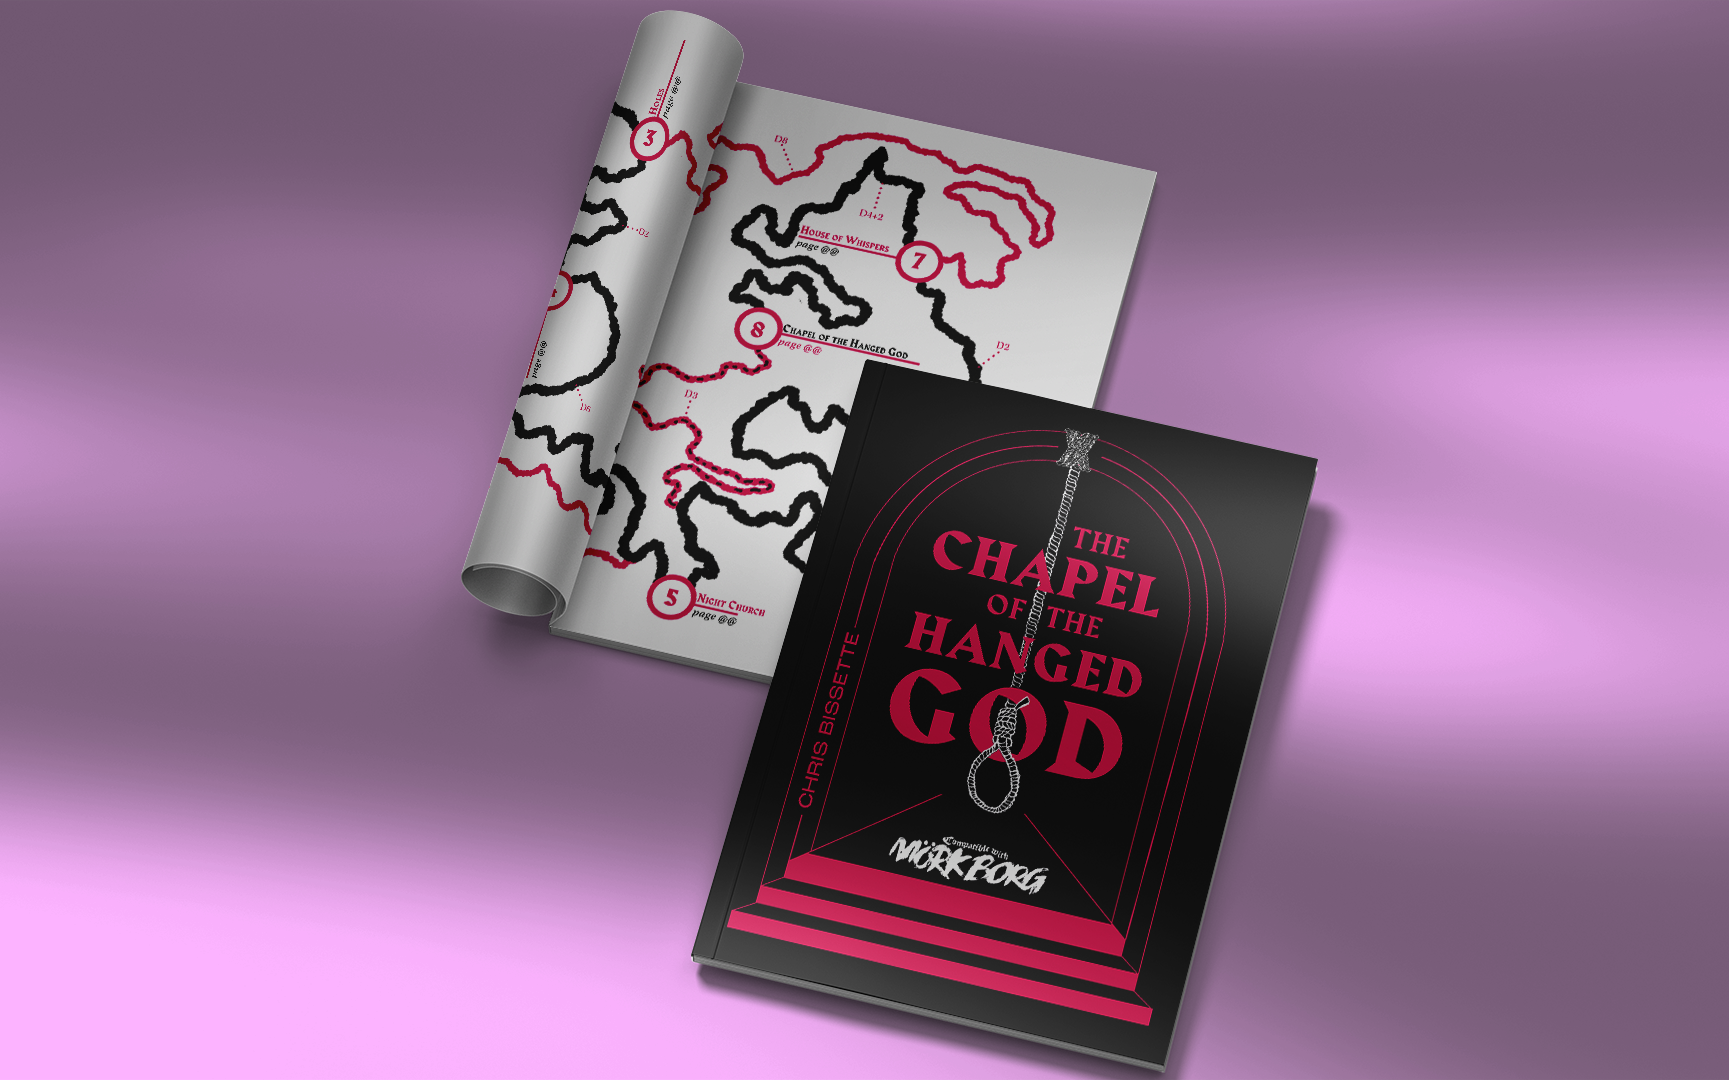 A mockup of an A5 perfect bound book. The cover is black and pink with a simple illustration of an archway aobve some steps. A noose hangs down from the arch into the tile "The Chapel of the Hanged God"